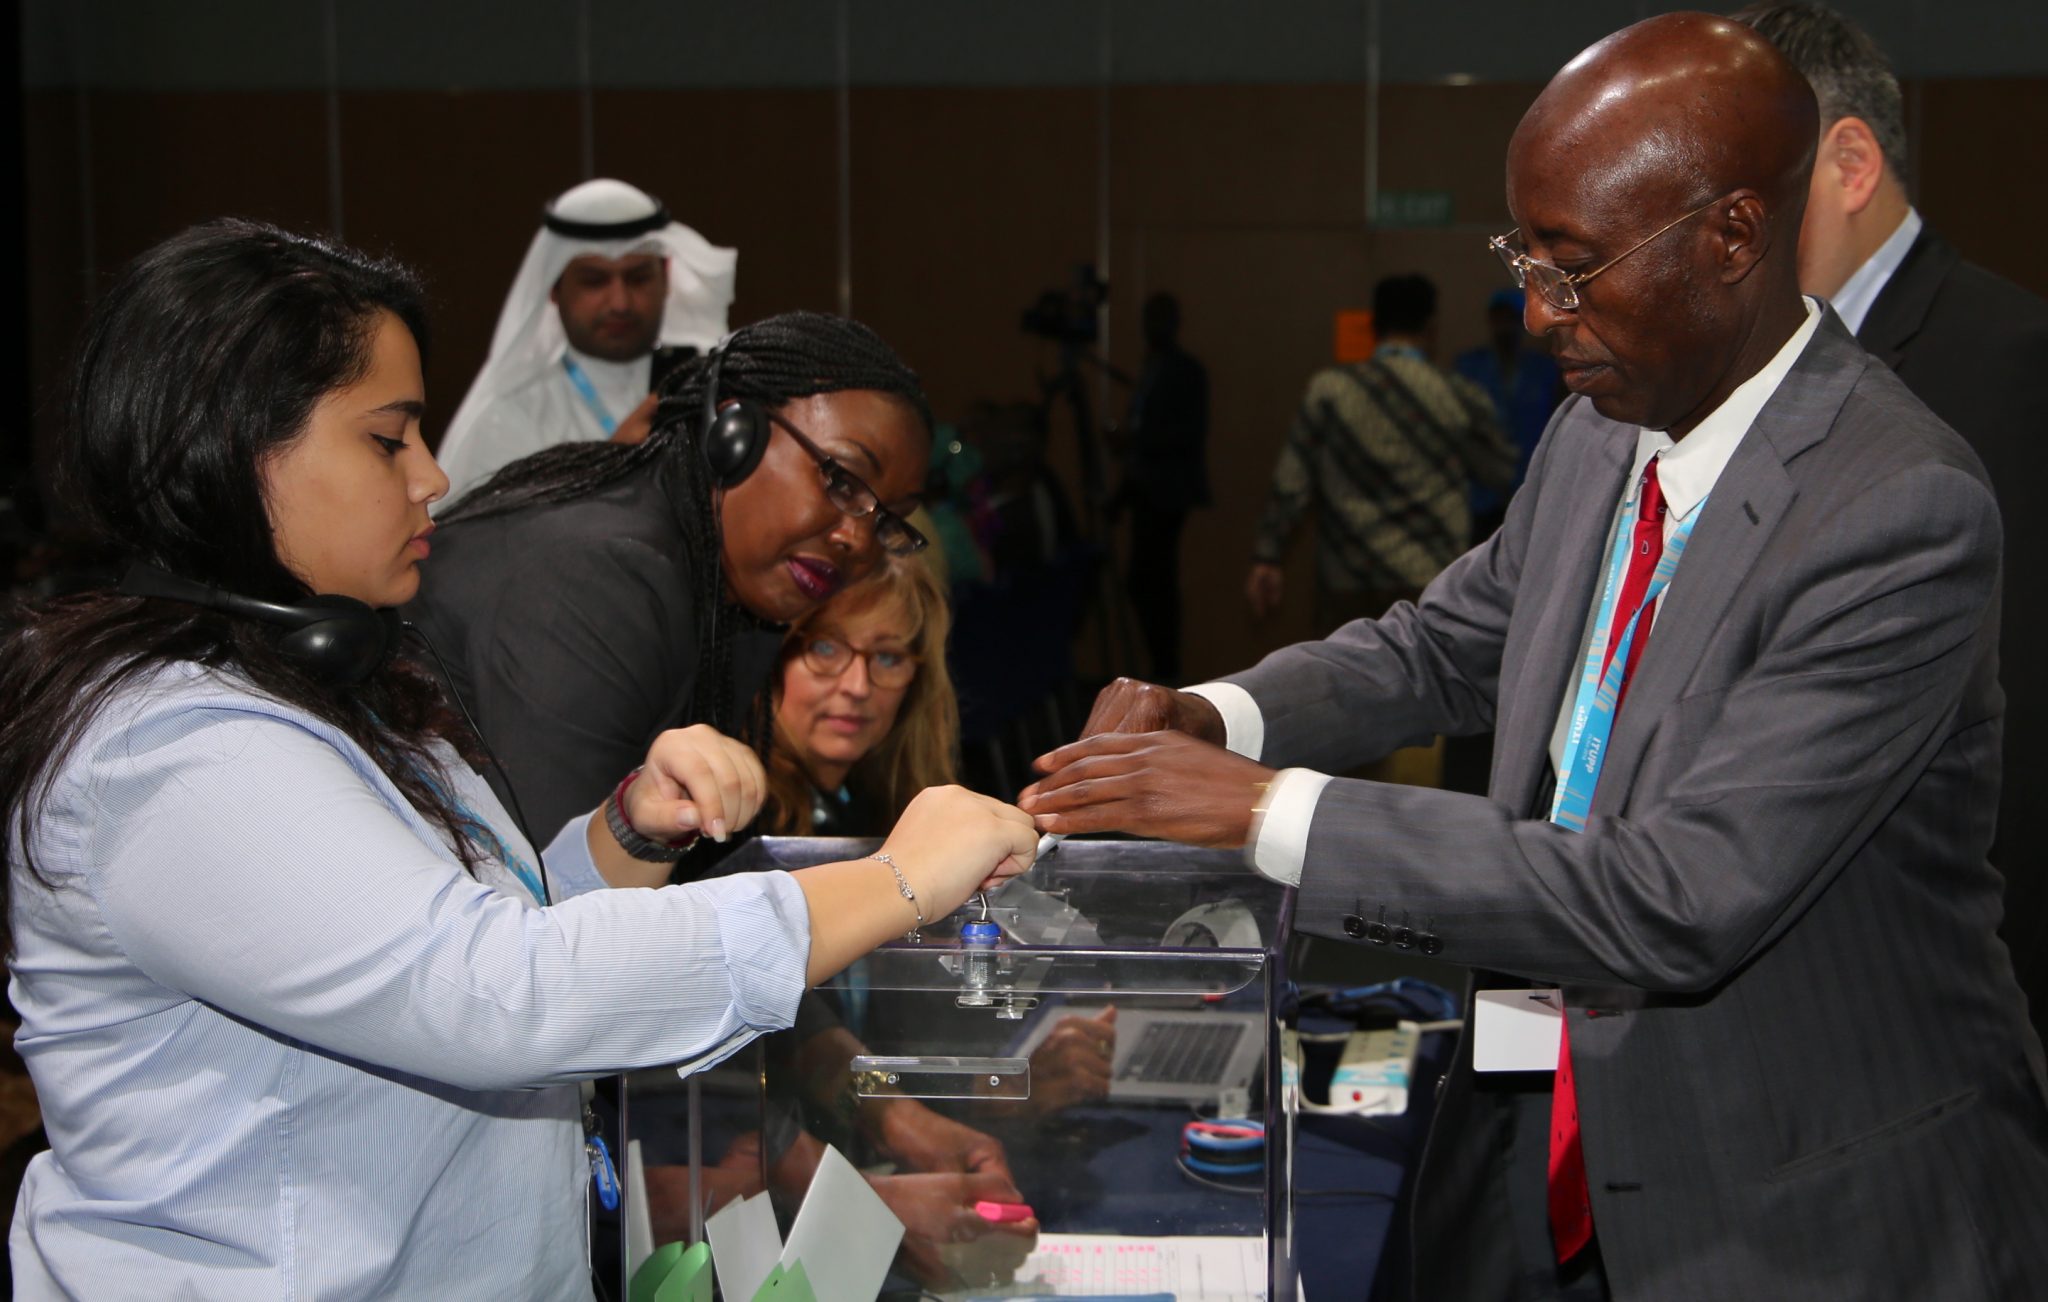 Communications Authority of Kenya (CA) chairman Mr.Ngene Gituku (right) casts his ballot during elections for membership to the International Telecommunications Union (ITU) Council today in Dubai, United Arab Emirates. Kenya was re-elected to the Council with 140 votes and joins 12 other countries that will represent Africa on the council.